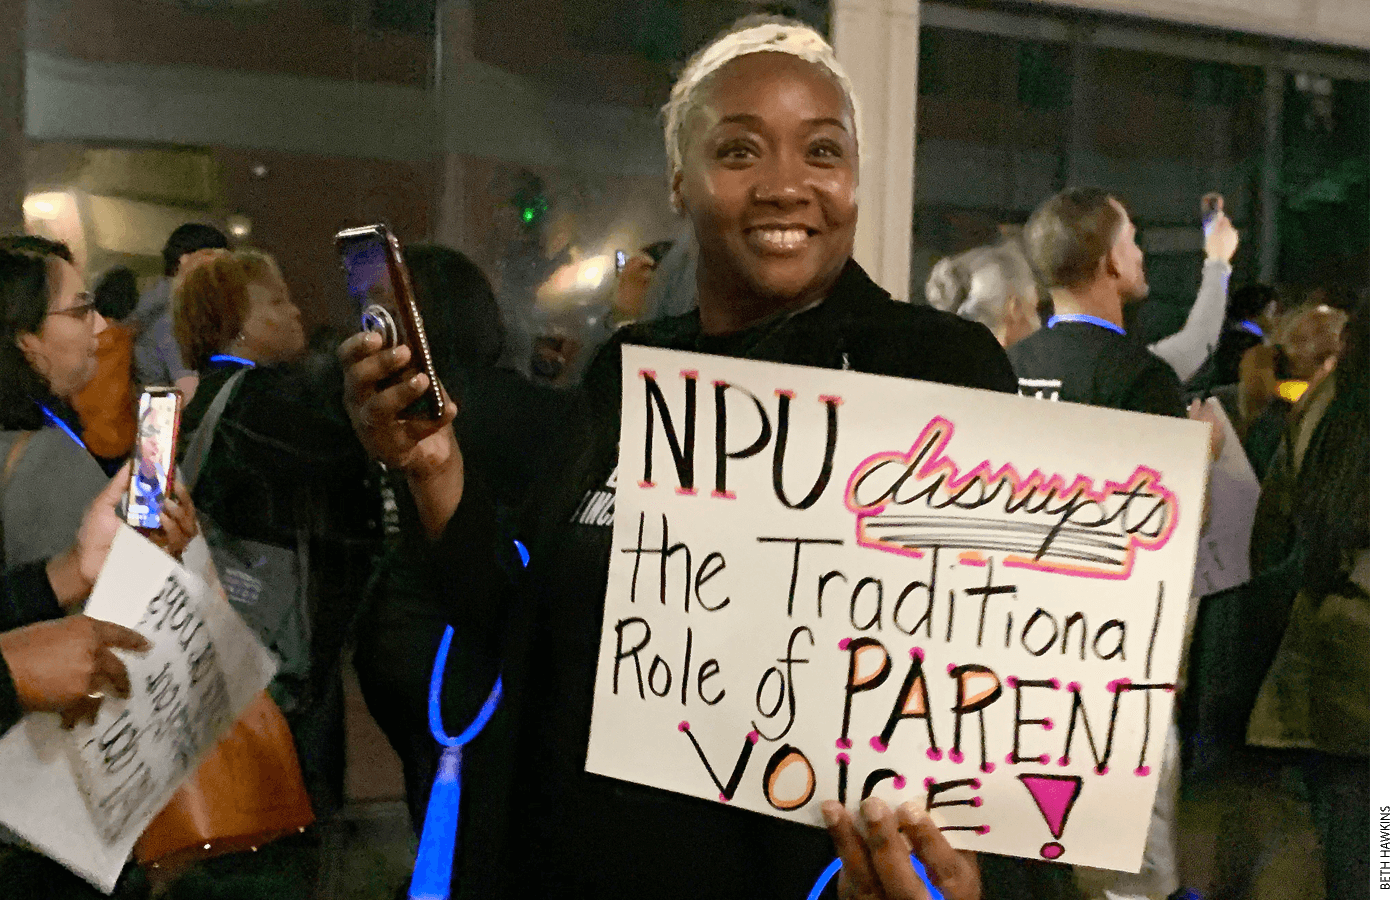 Members of the National Parents Union, such as New York City teacher Vivett Dukes, pictured here, participated in online Town Hall meetings throughout the pandemic. The organization sent a letter to U.S. Education Secretary Miguel Cardona.